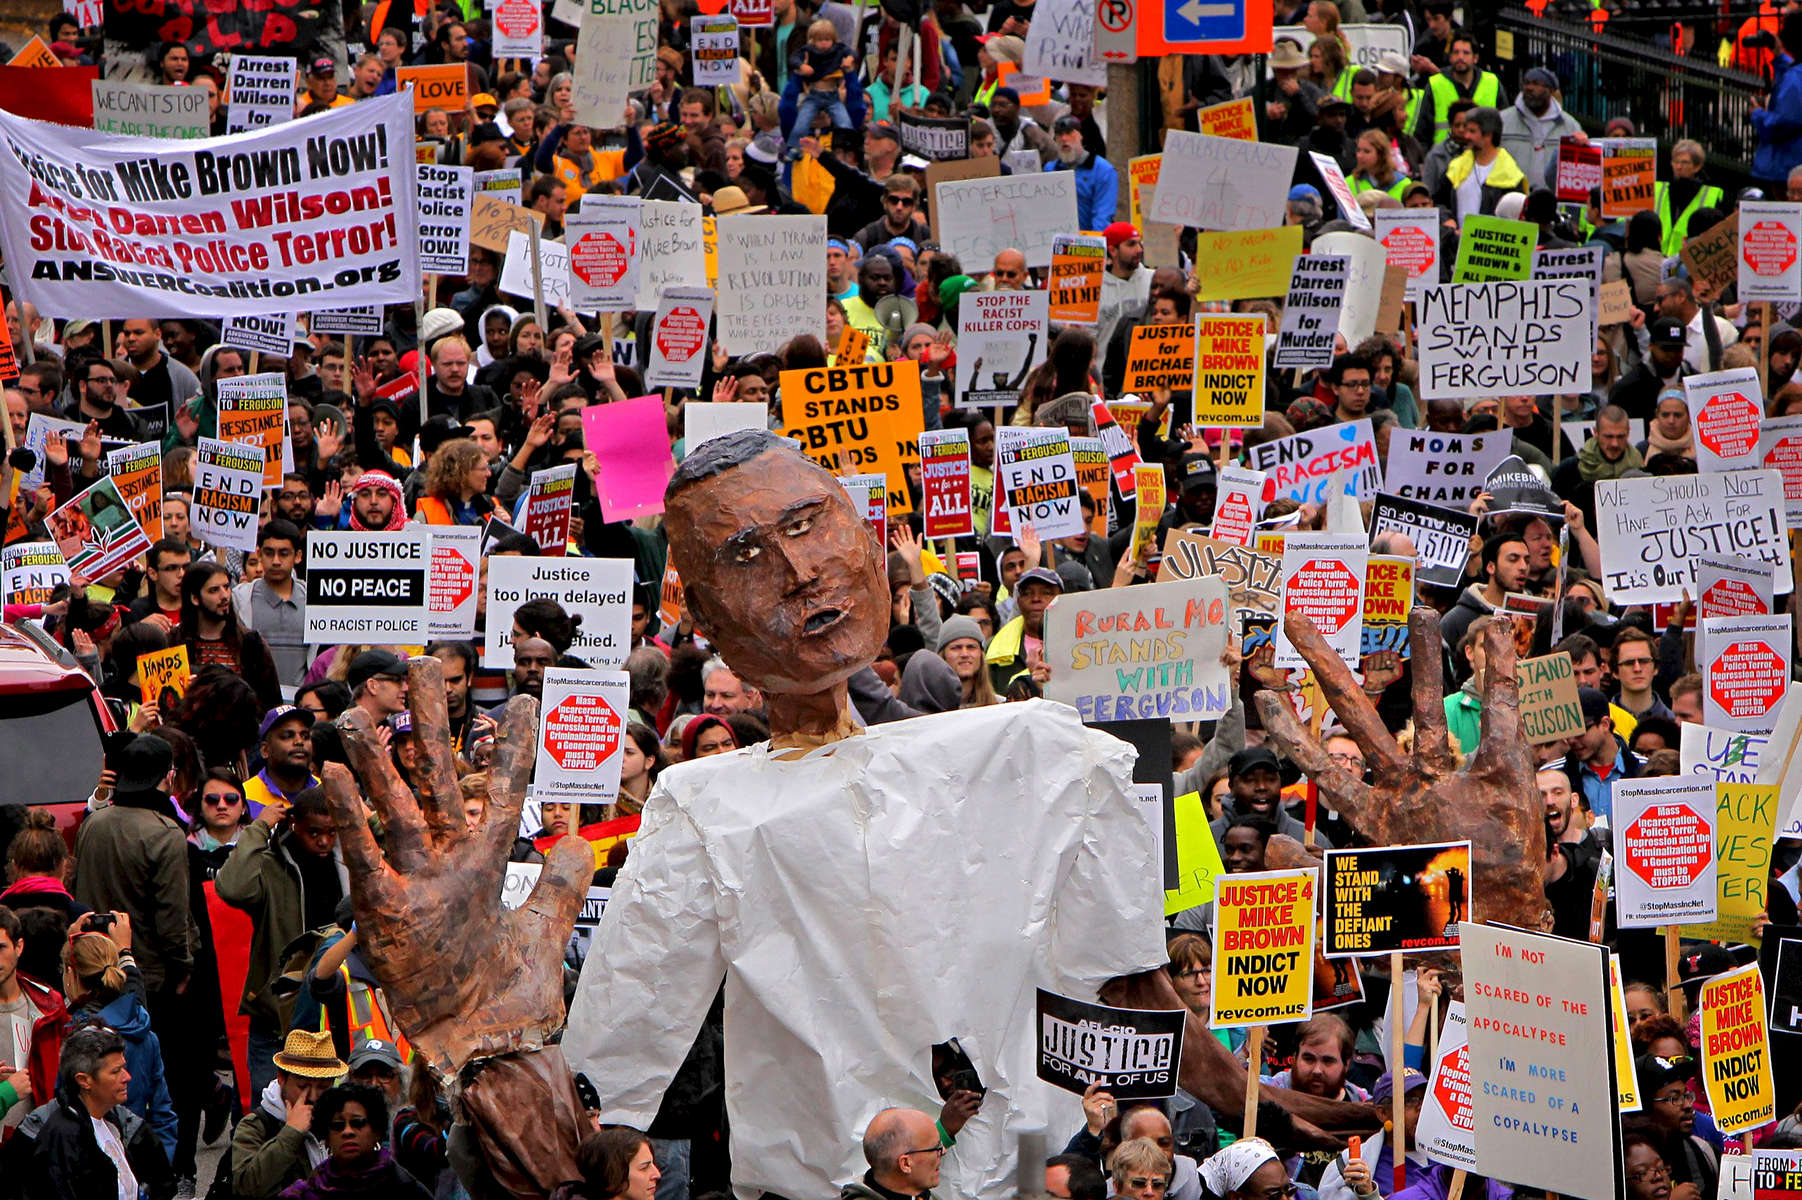 Thousands of protesters from around the country march towards Kiener Plaza in downtown St. Louis during the Ferguson October rally on Saturday, October, 11, 2014.  The unrest in Ferguson rising from the death of Michael Brown spread around the world on social media and was beginning to grown into a movement.